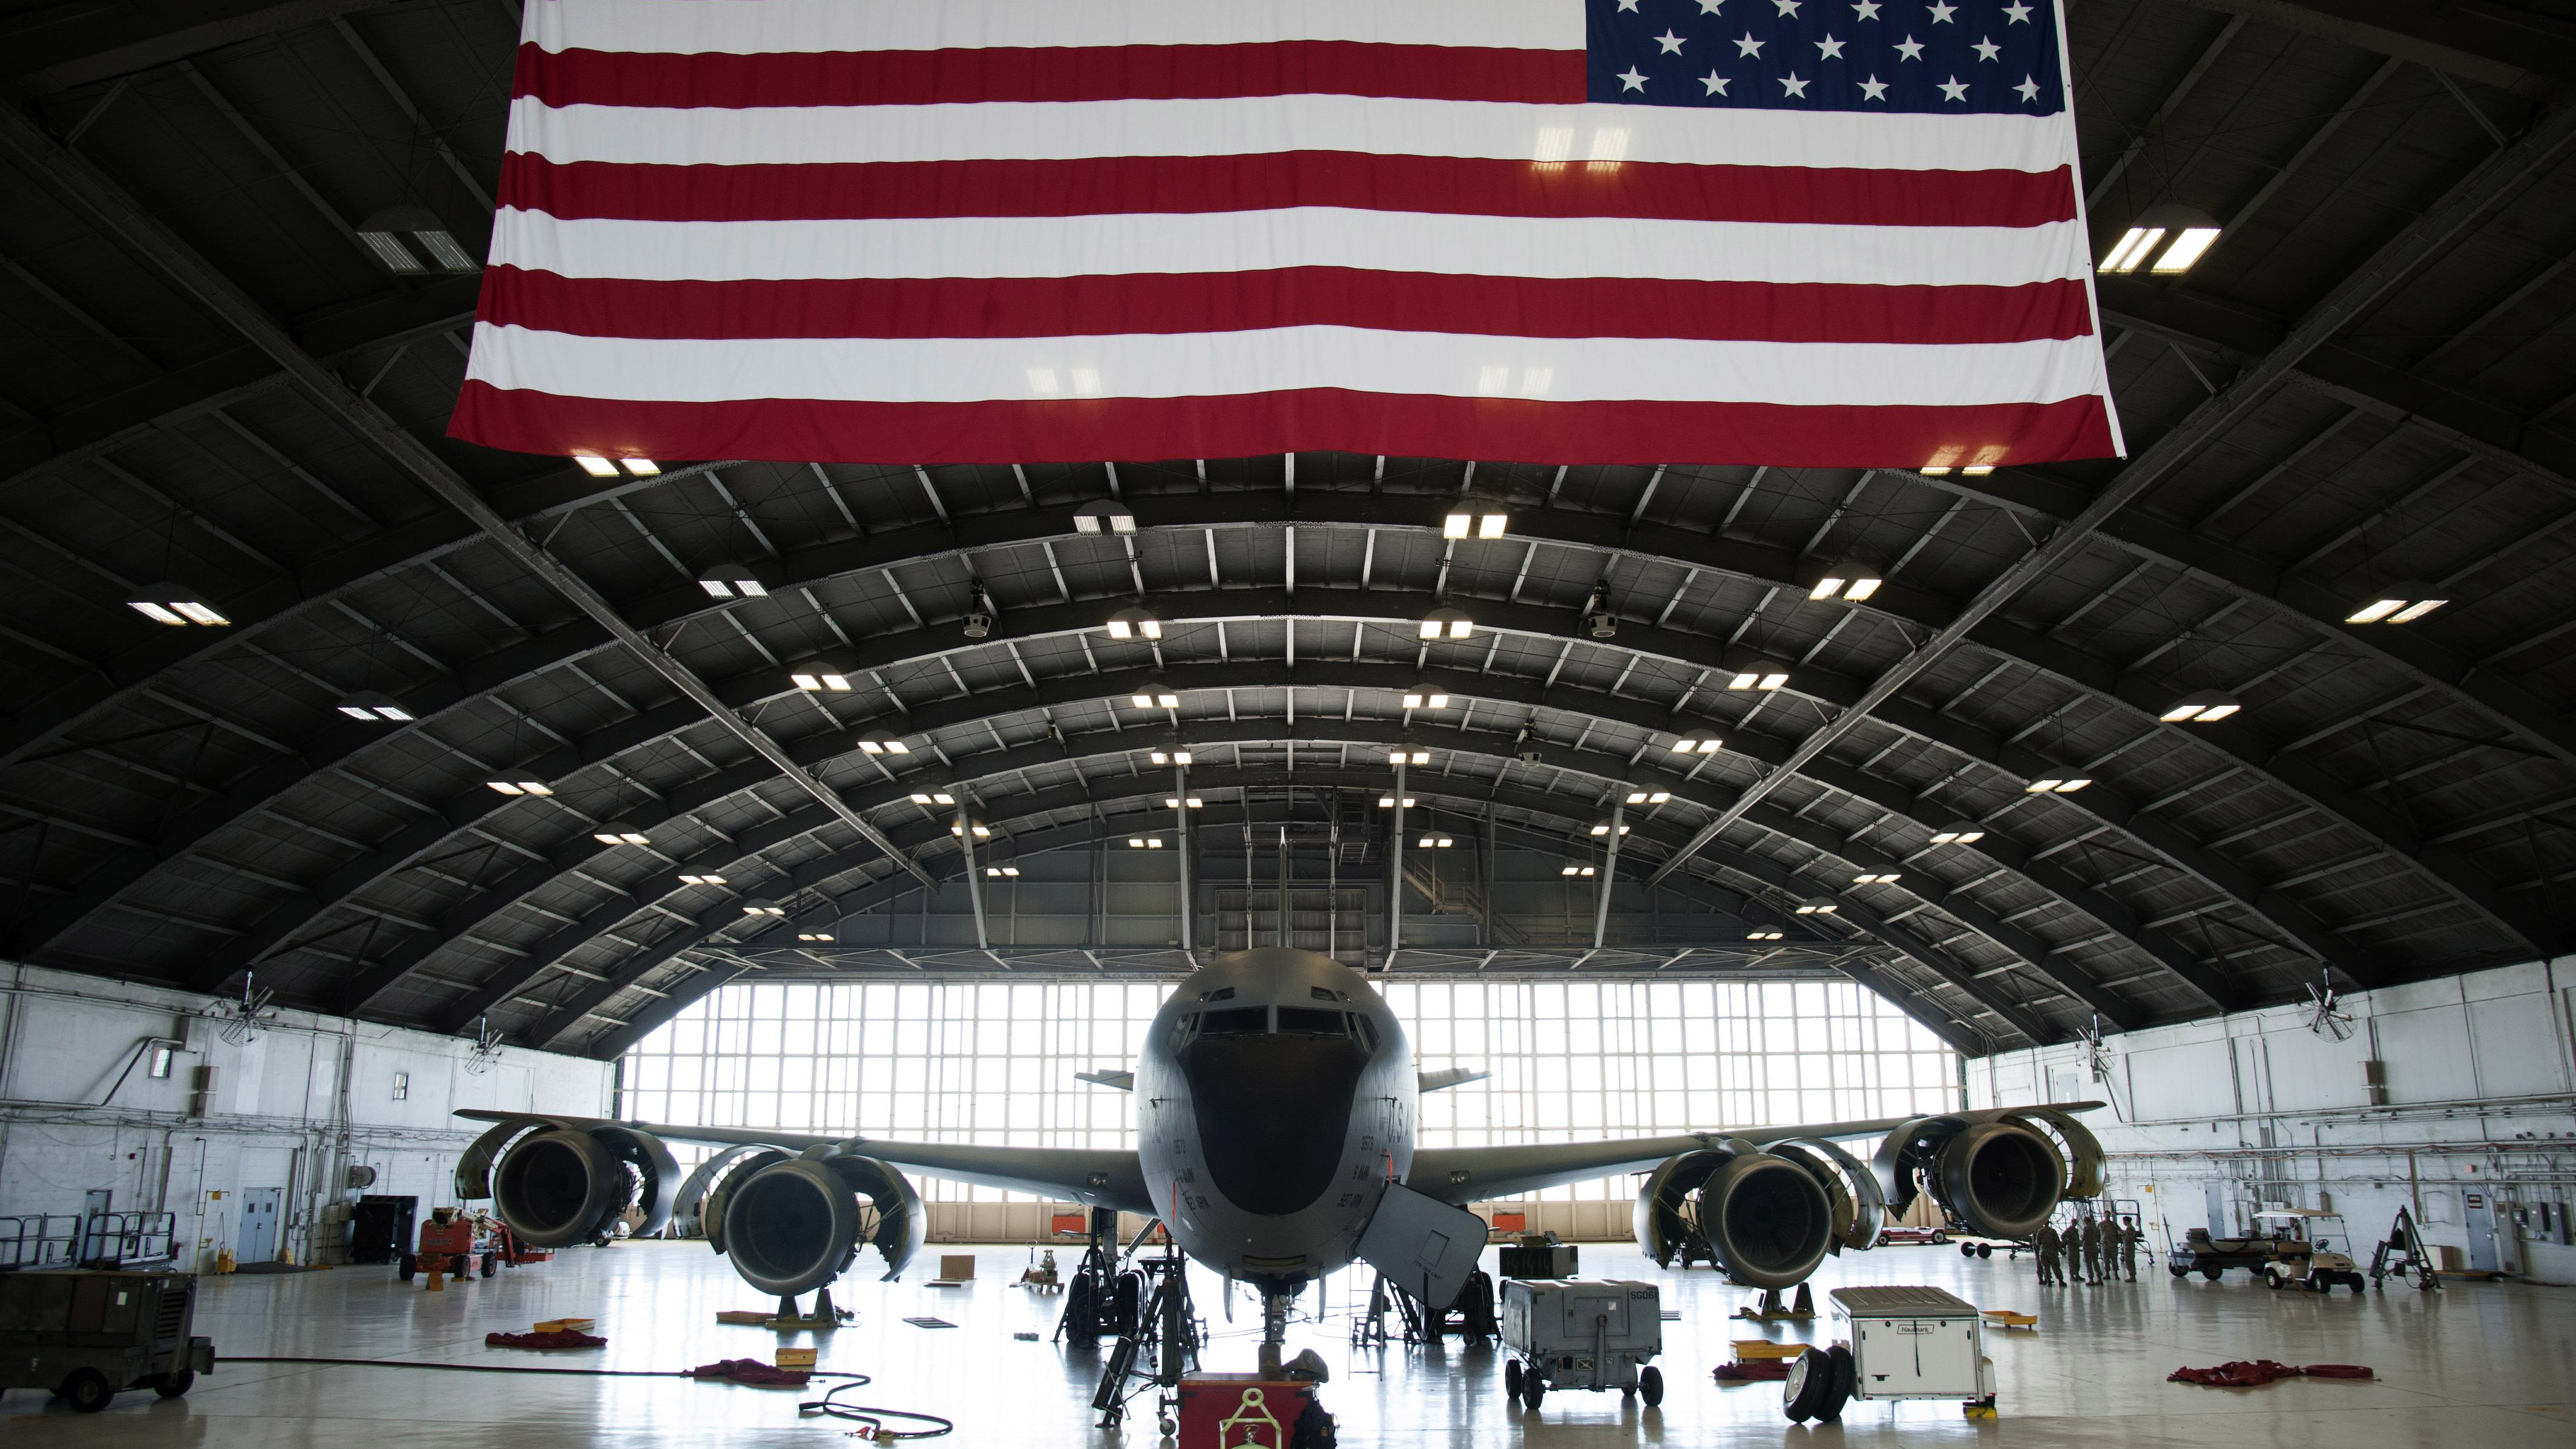 A KC-135 Stratotanker aircraft parked in a hangar during repairs at MacDill Air Force Base, Florida, Aril 12, 2017. Over the past few weeks, Airmen provided engine maintenance to ensure the safety of the aircraft. (U.S. Air Force photo by Airman 1st Class Mariette Adams)